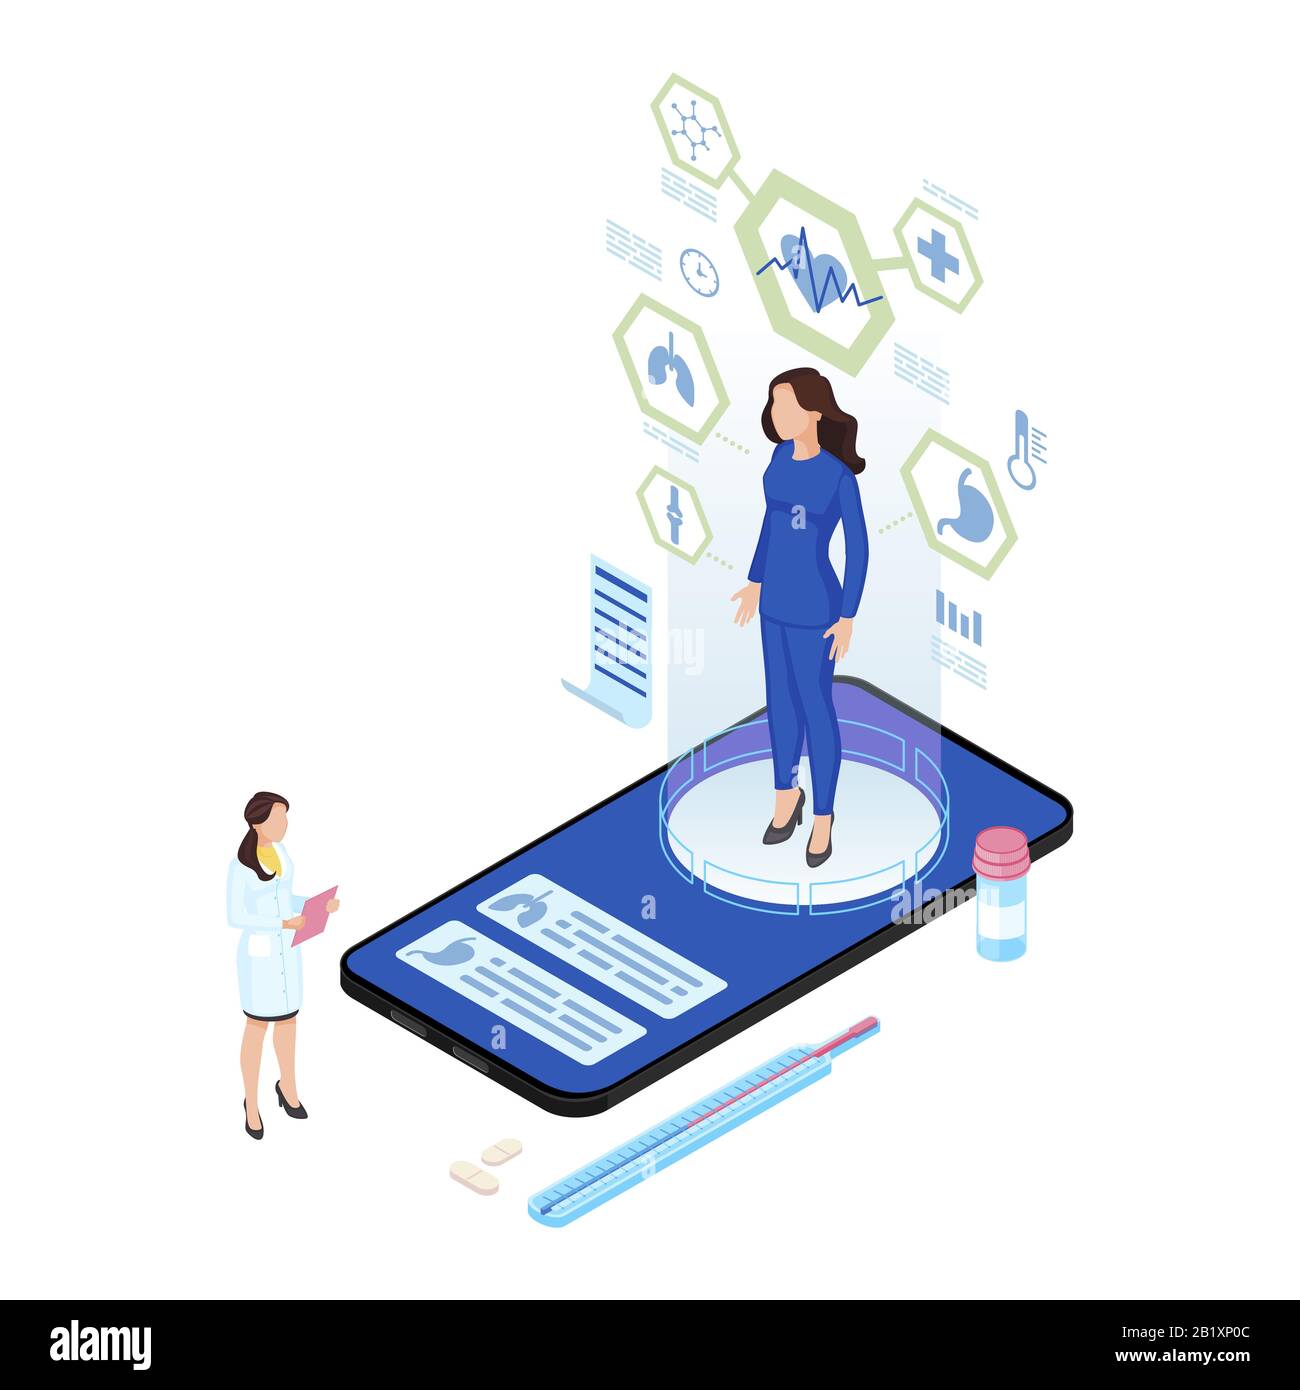 Remote body scanning isometric illustration. Patient hologram with internal organs analysis. Futuristic telemedicine with augmented reality options Stock Vector